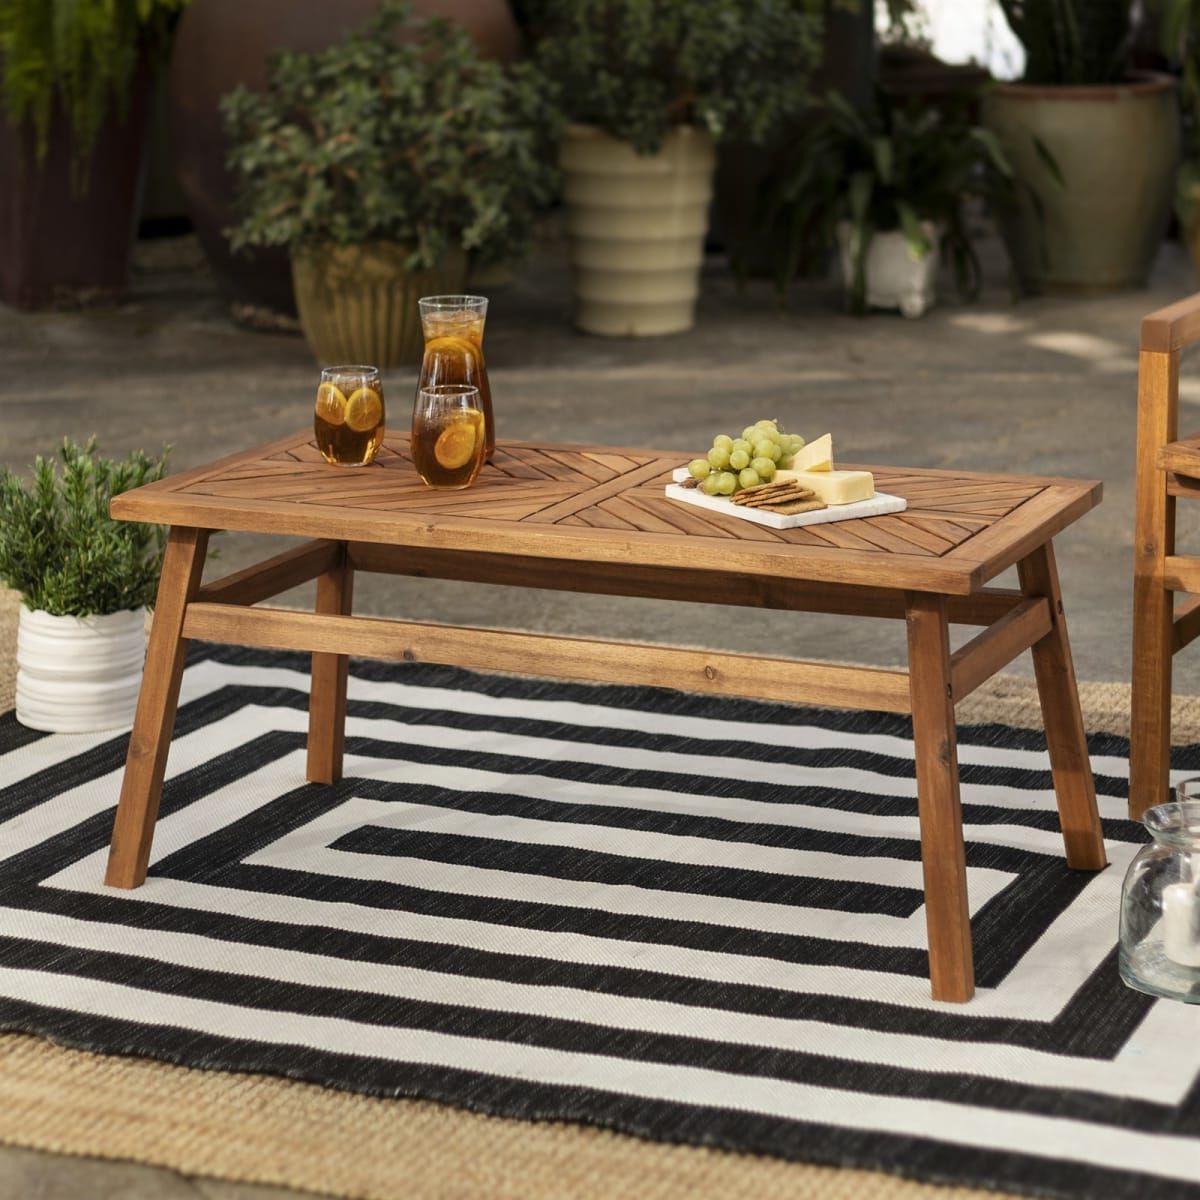 With An Acacia Wood Construction, This Patio Coffee Table Is Perfect Inside Modern Outdoor Patio Coffee Tables (View 17 of 20)